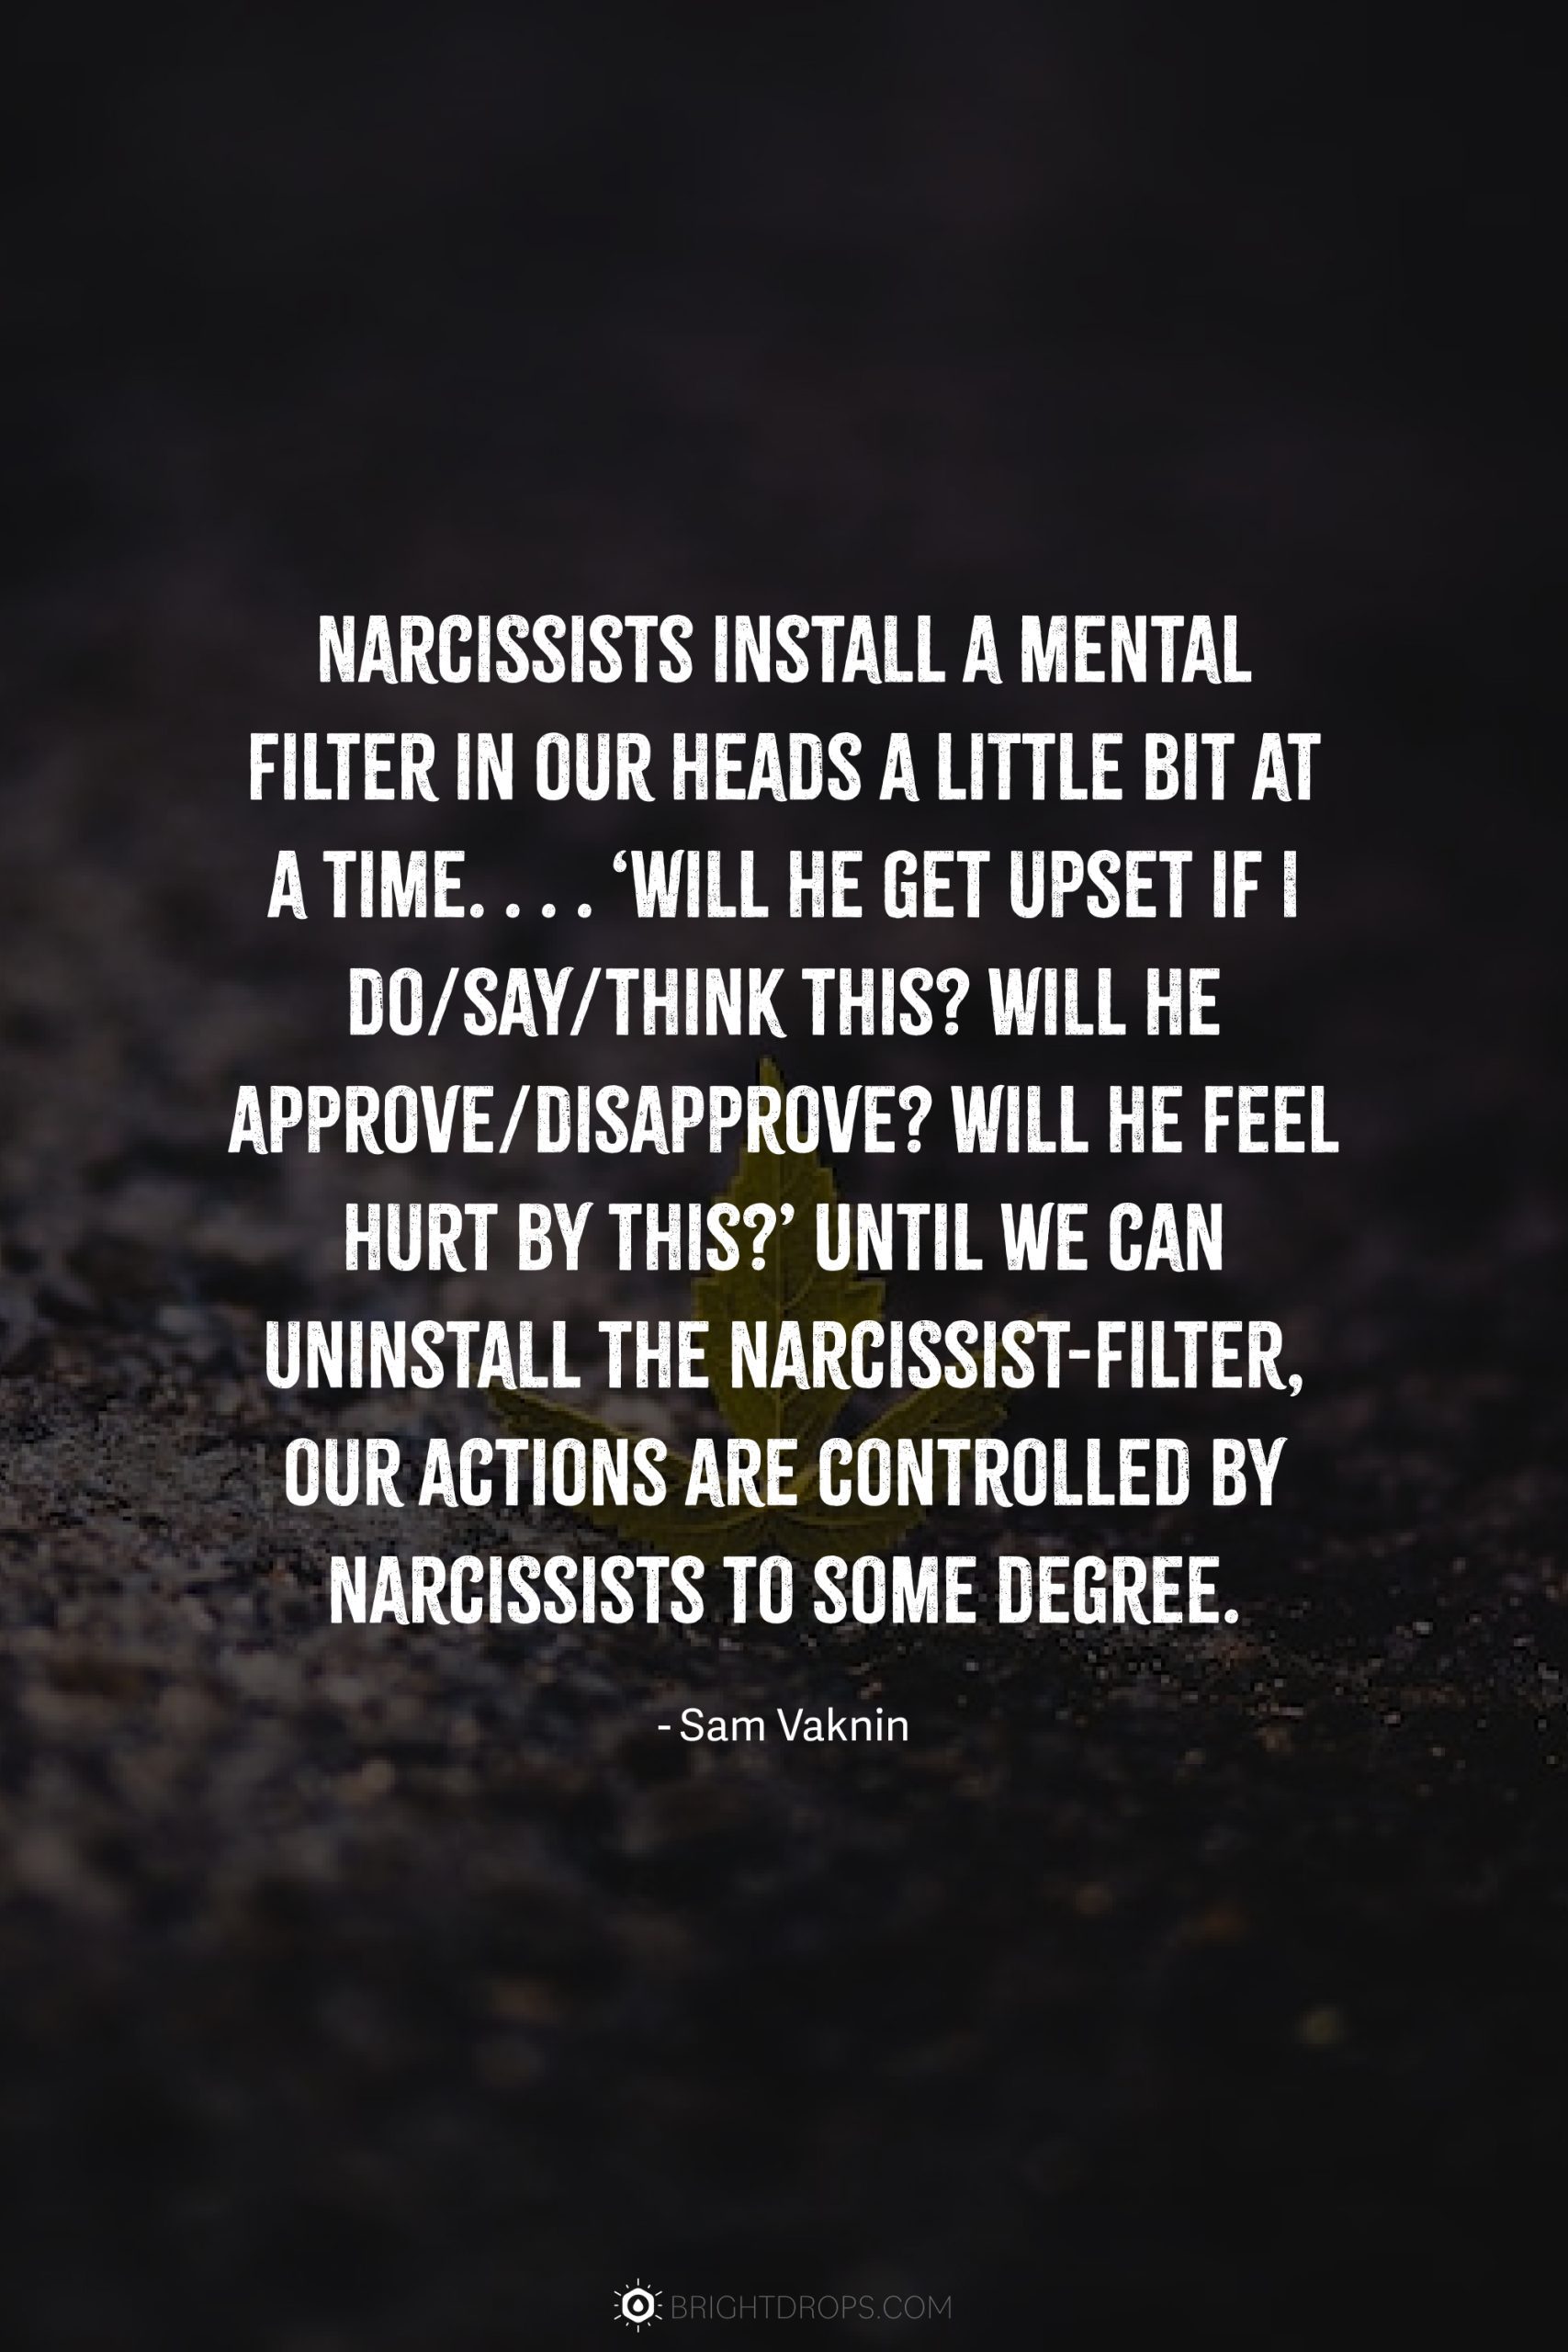 Narcissists install a mental filter in our heads a little bit at a time. . . . ‘Will he get upset if I do/say/think this? Will he approve/disapprove? Will he feel hurt by this?’ Until we can uninstall the narcissist-filter, our actions are controlled by narcissists to some degree.